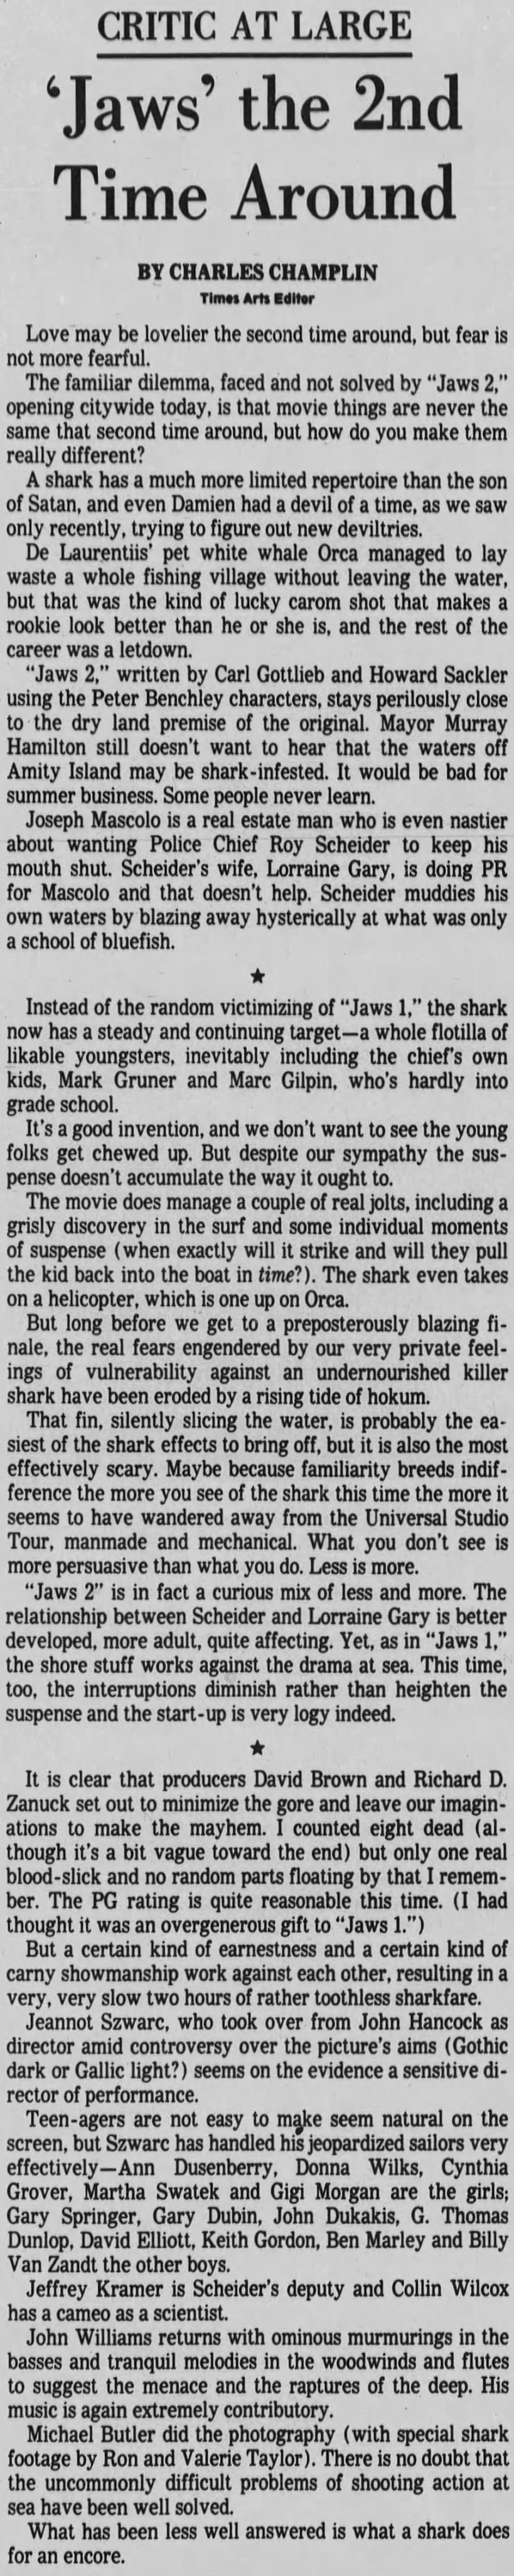 Los Angeles Times Movie Review—JAWS 2 (06-16-78)